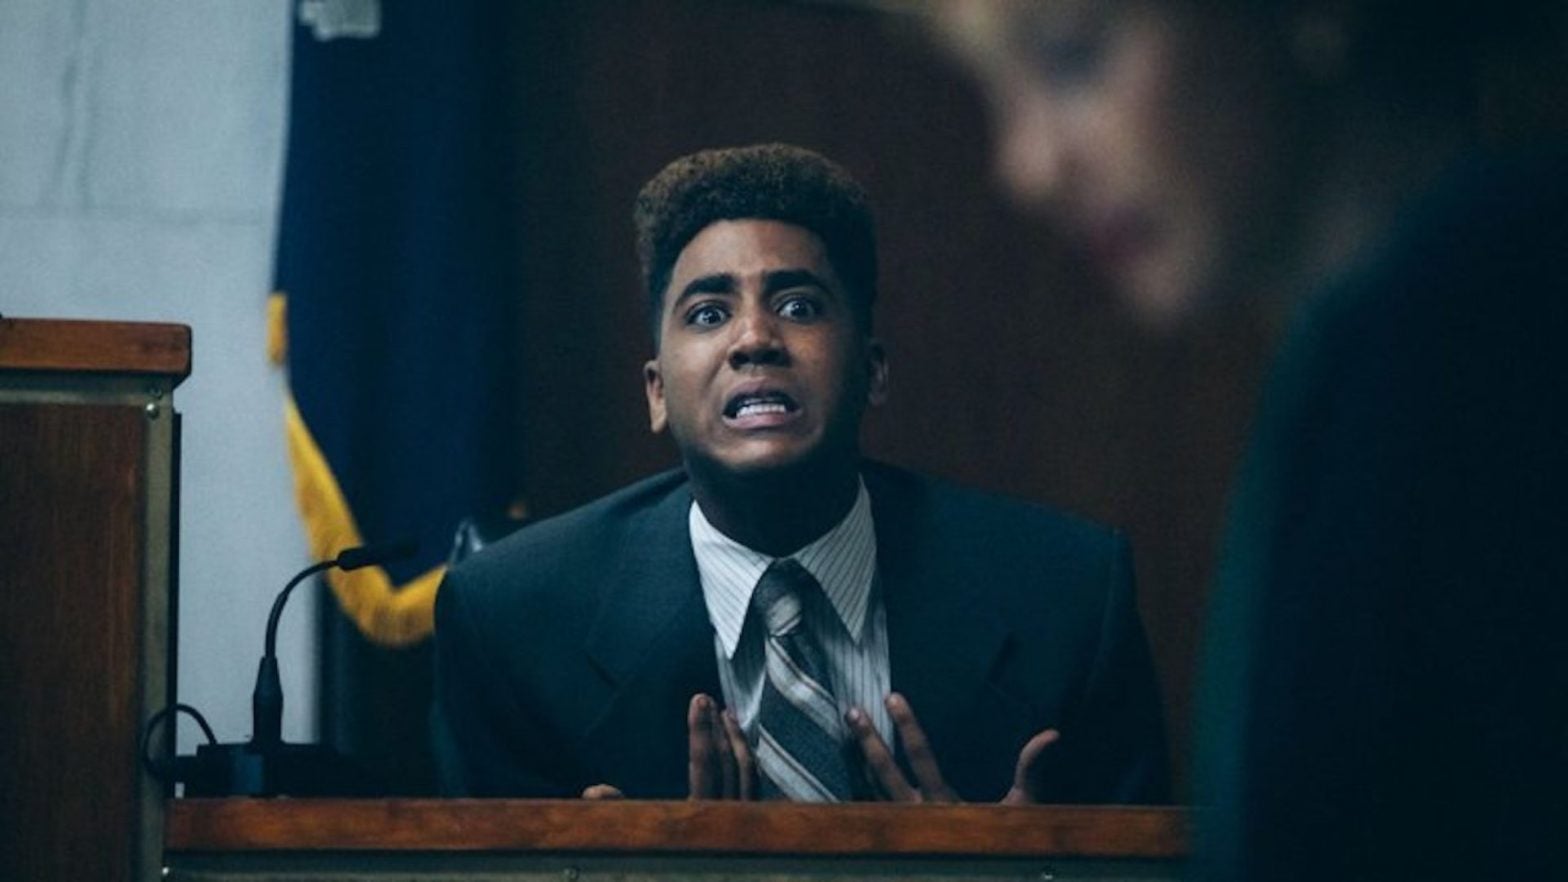 Netflix Calls Linda Fairstein's Lawsuit Over ‘When They See Us’ Portrayal 'Frivolous'